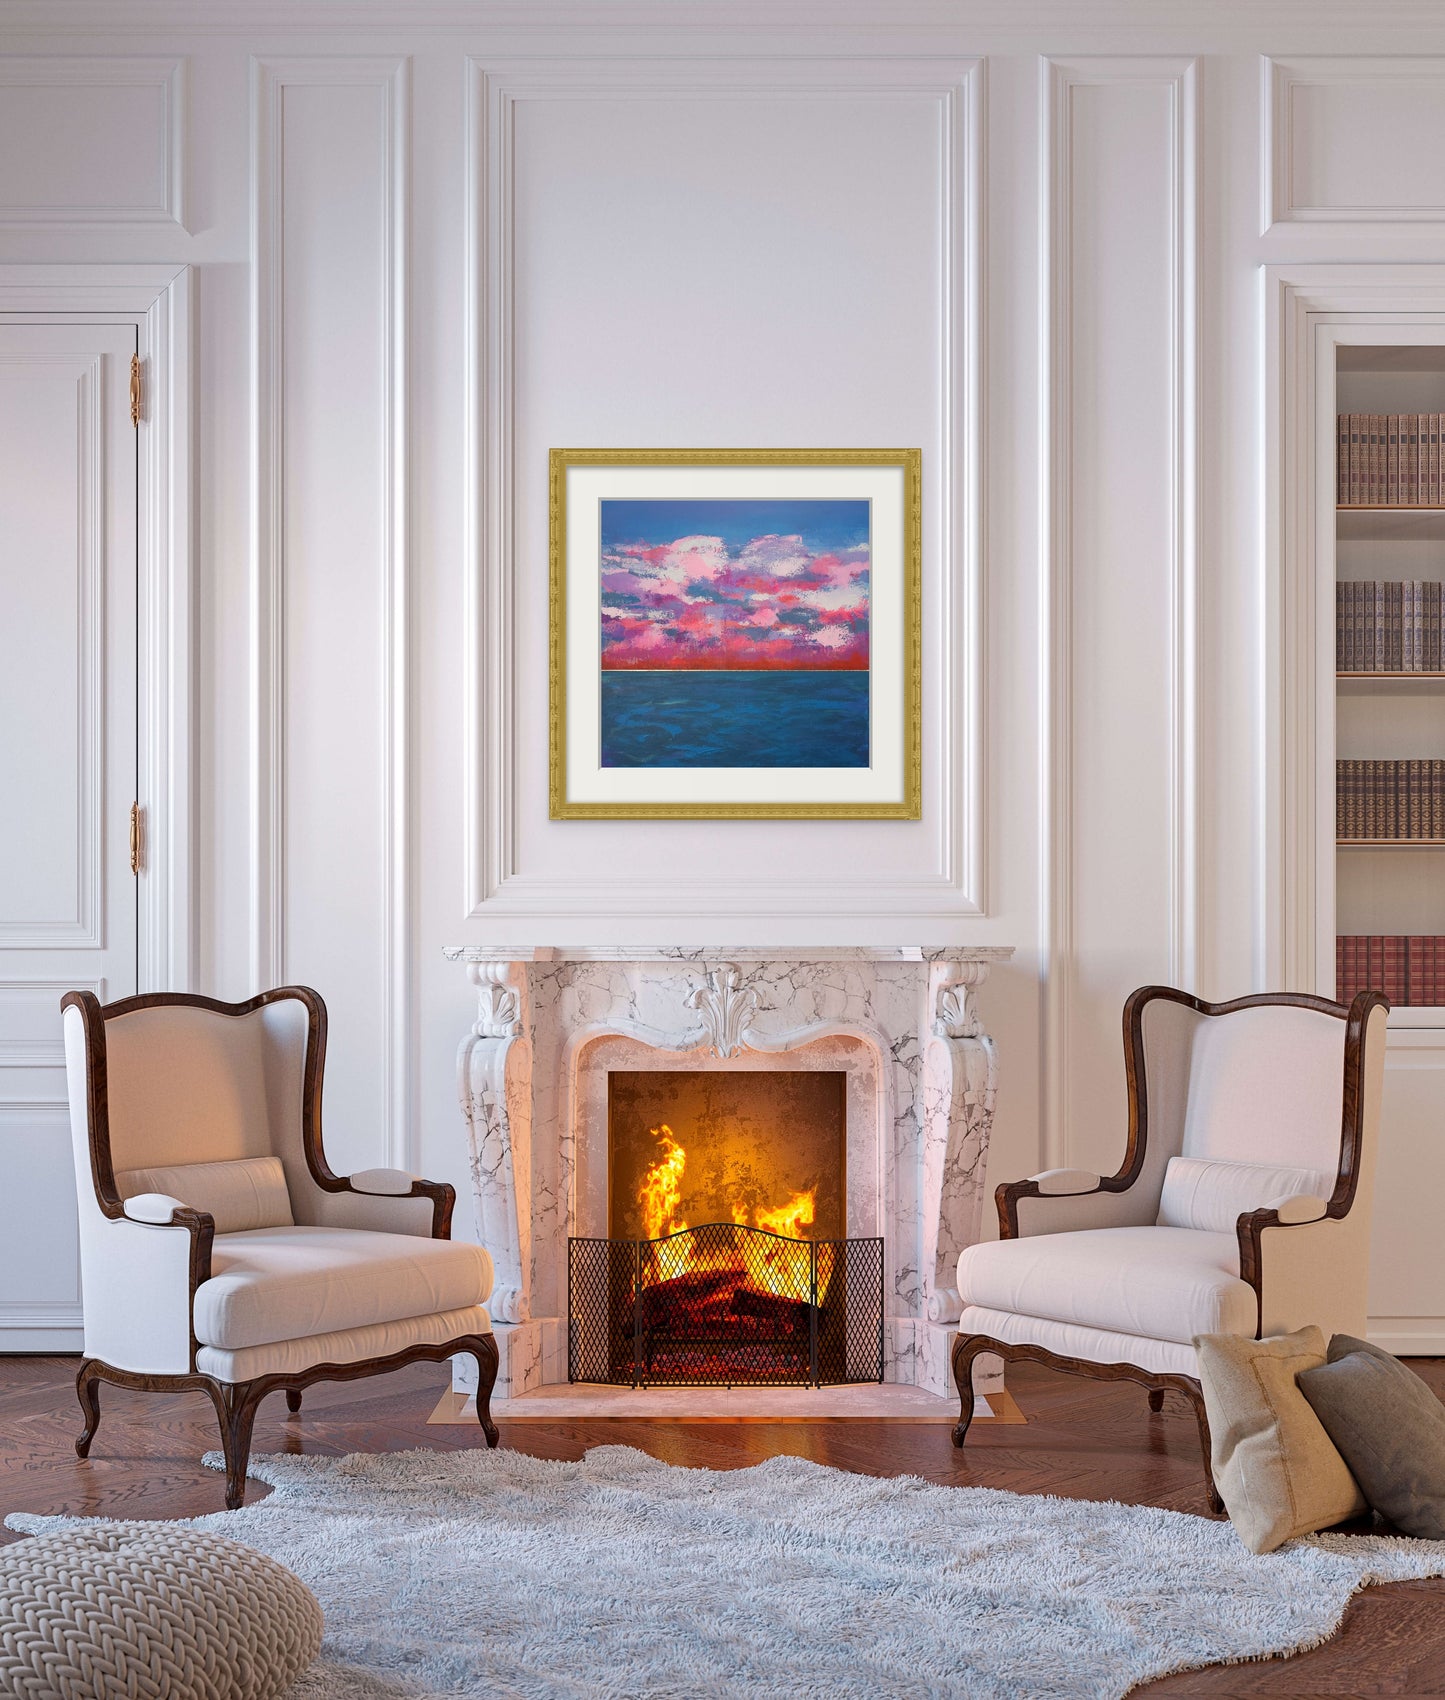 Elegant sitting room with victorian fireplace and the painting framed in gold above  the mantel.